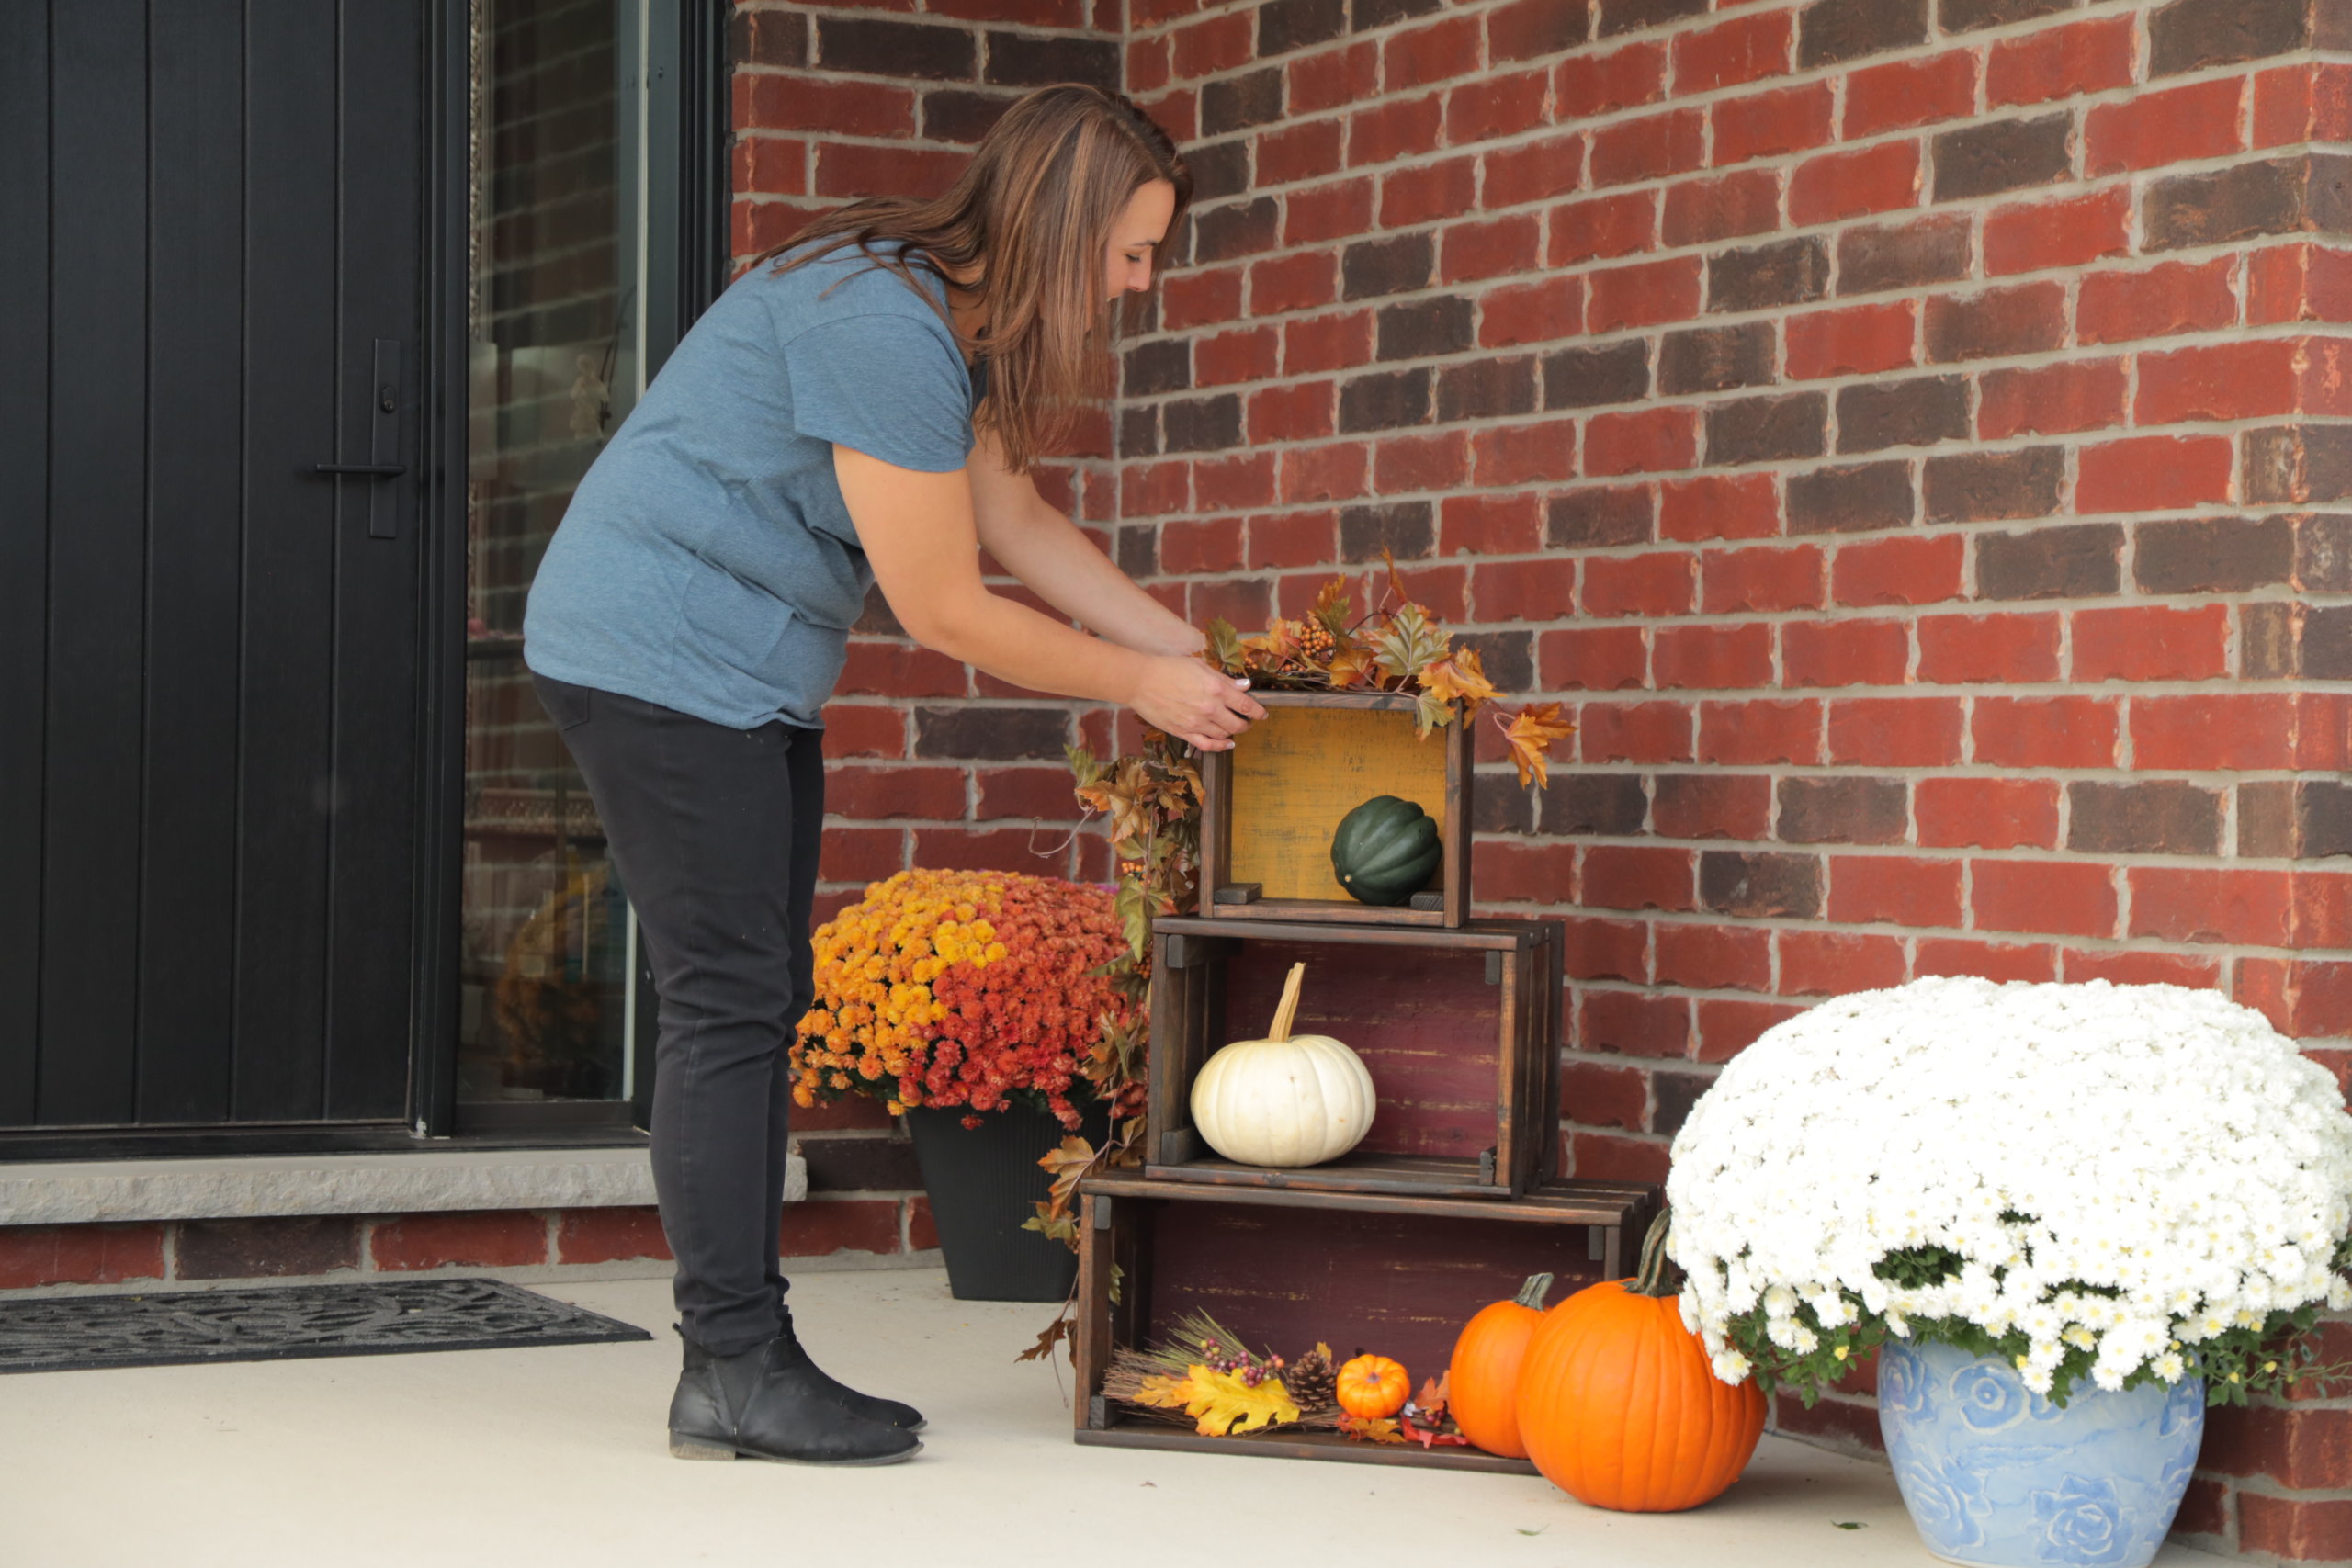 woman sets up fall porch display with wood crates and pumpkins